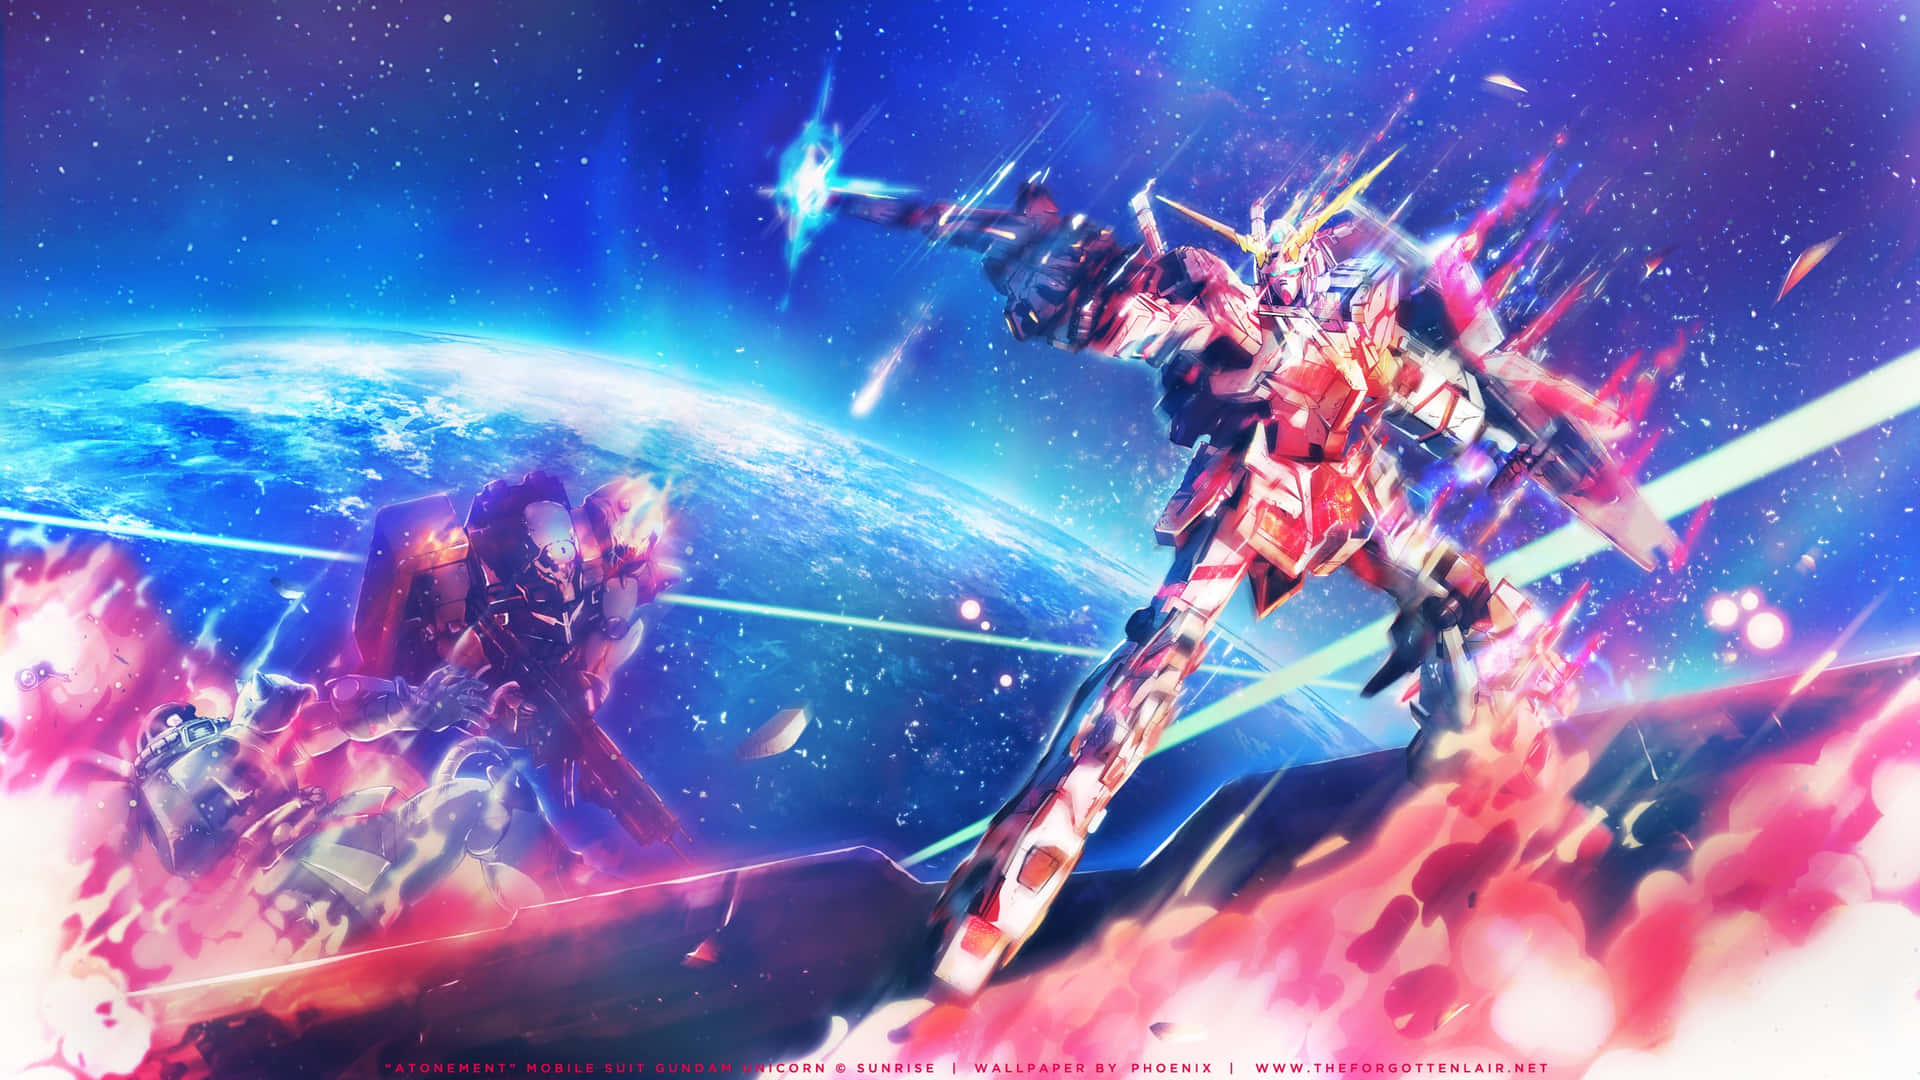 Mobile Suit Gundam Wing in Action Wallpaper